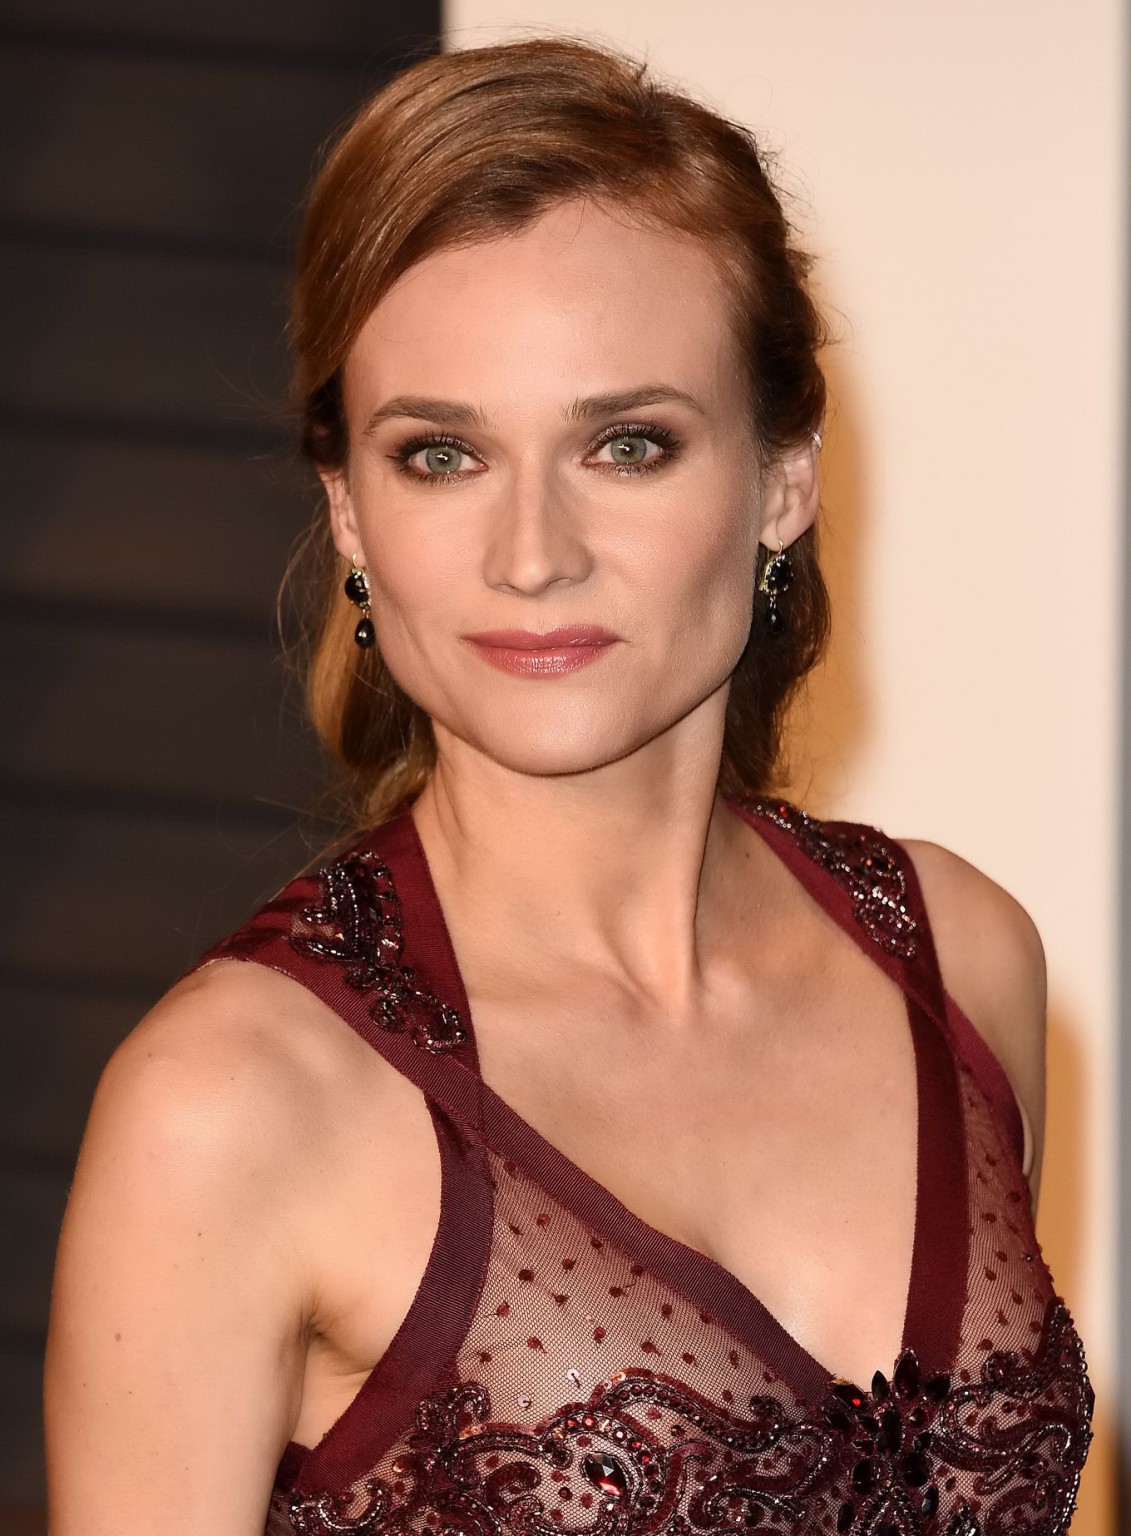 Diane Kruger shows off her boobs and ass in sheer dress #75145392